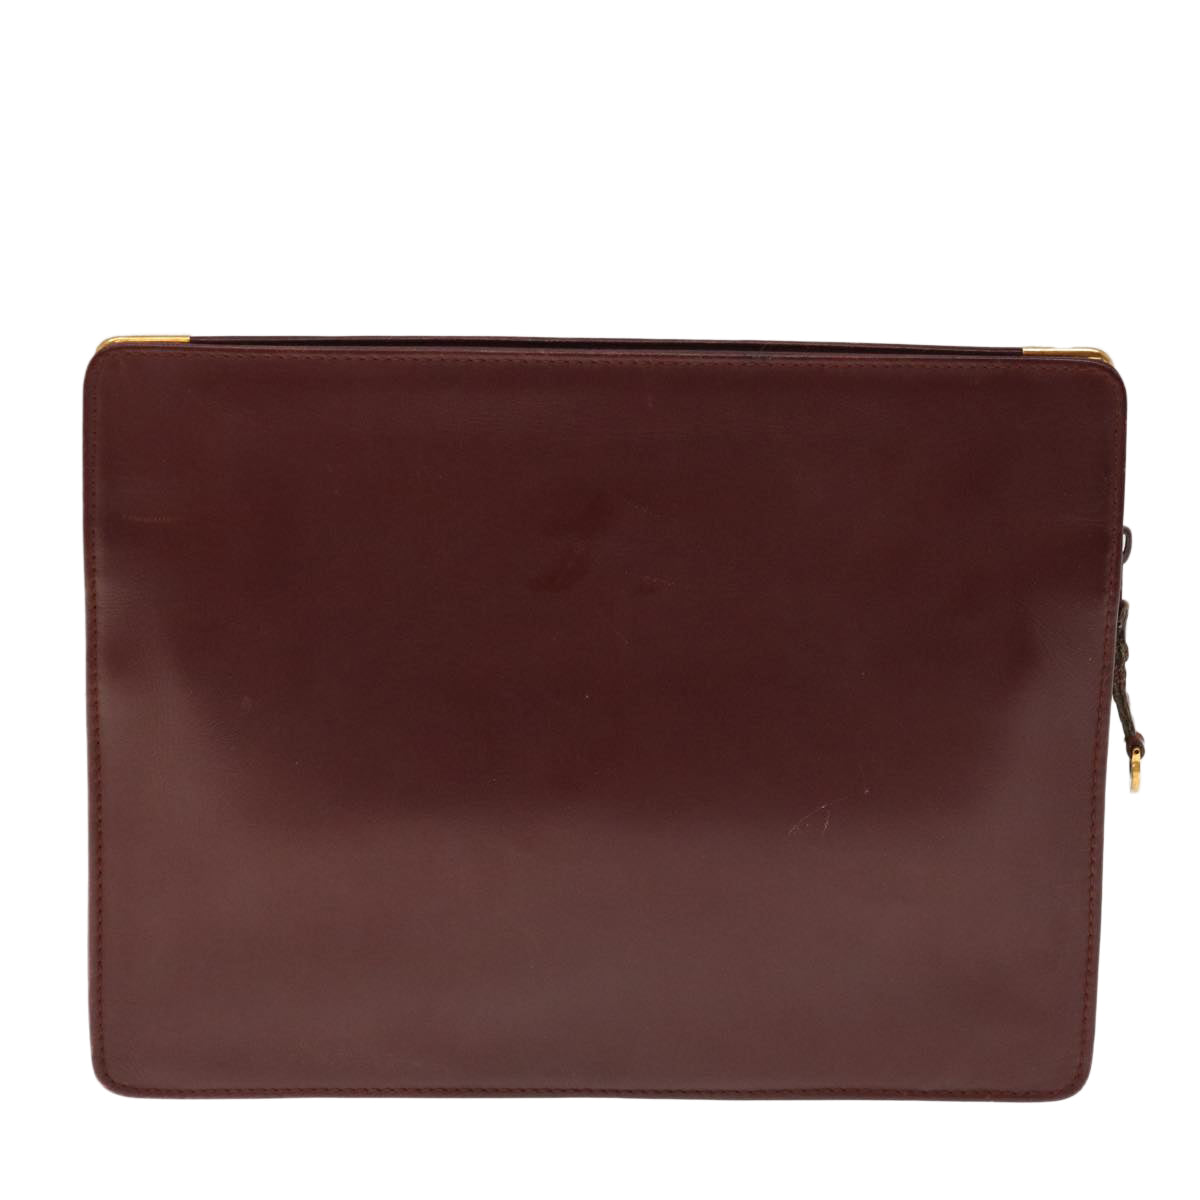 CARTIER Clutch Bag Leather Wine Red Auth 63905 - 0